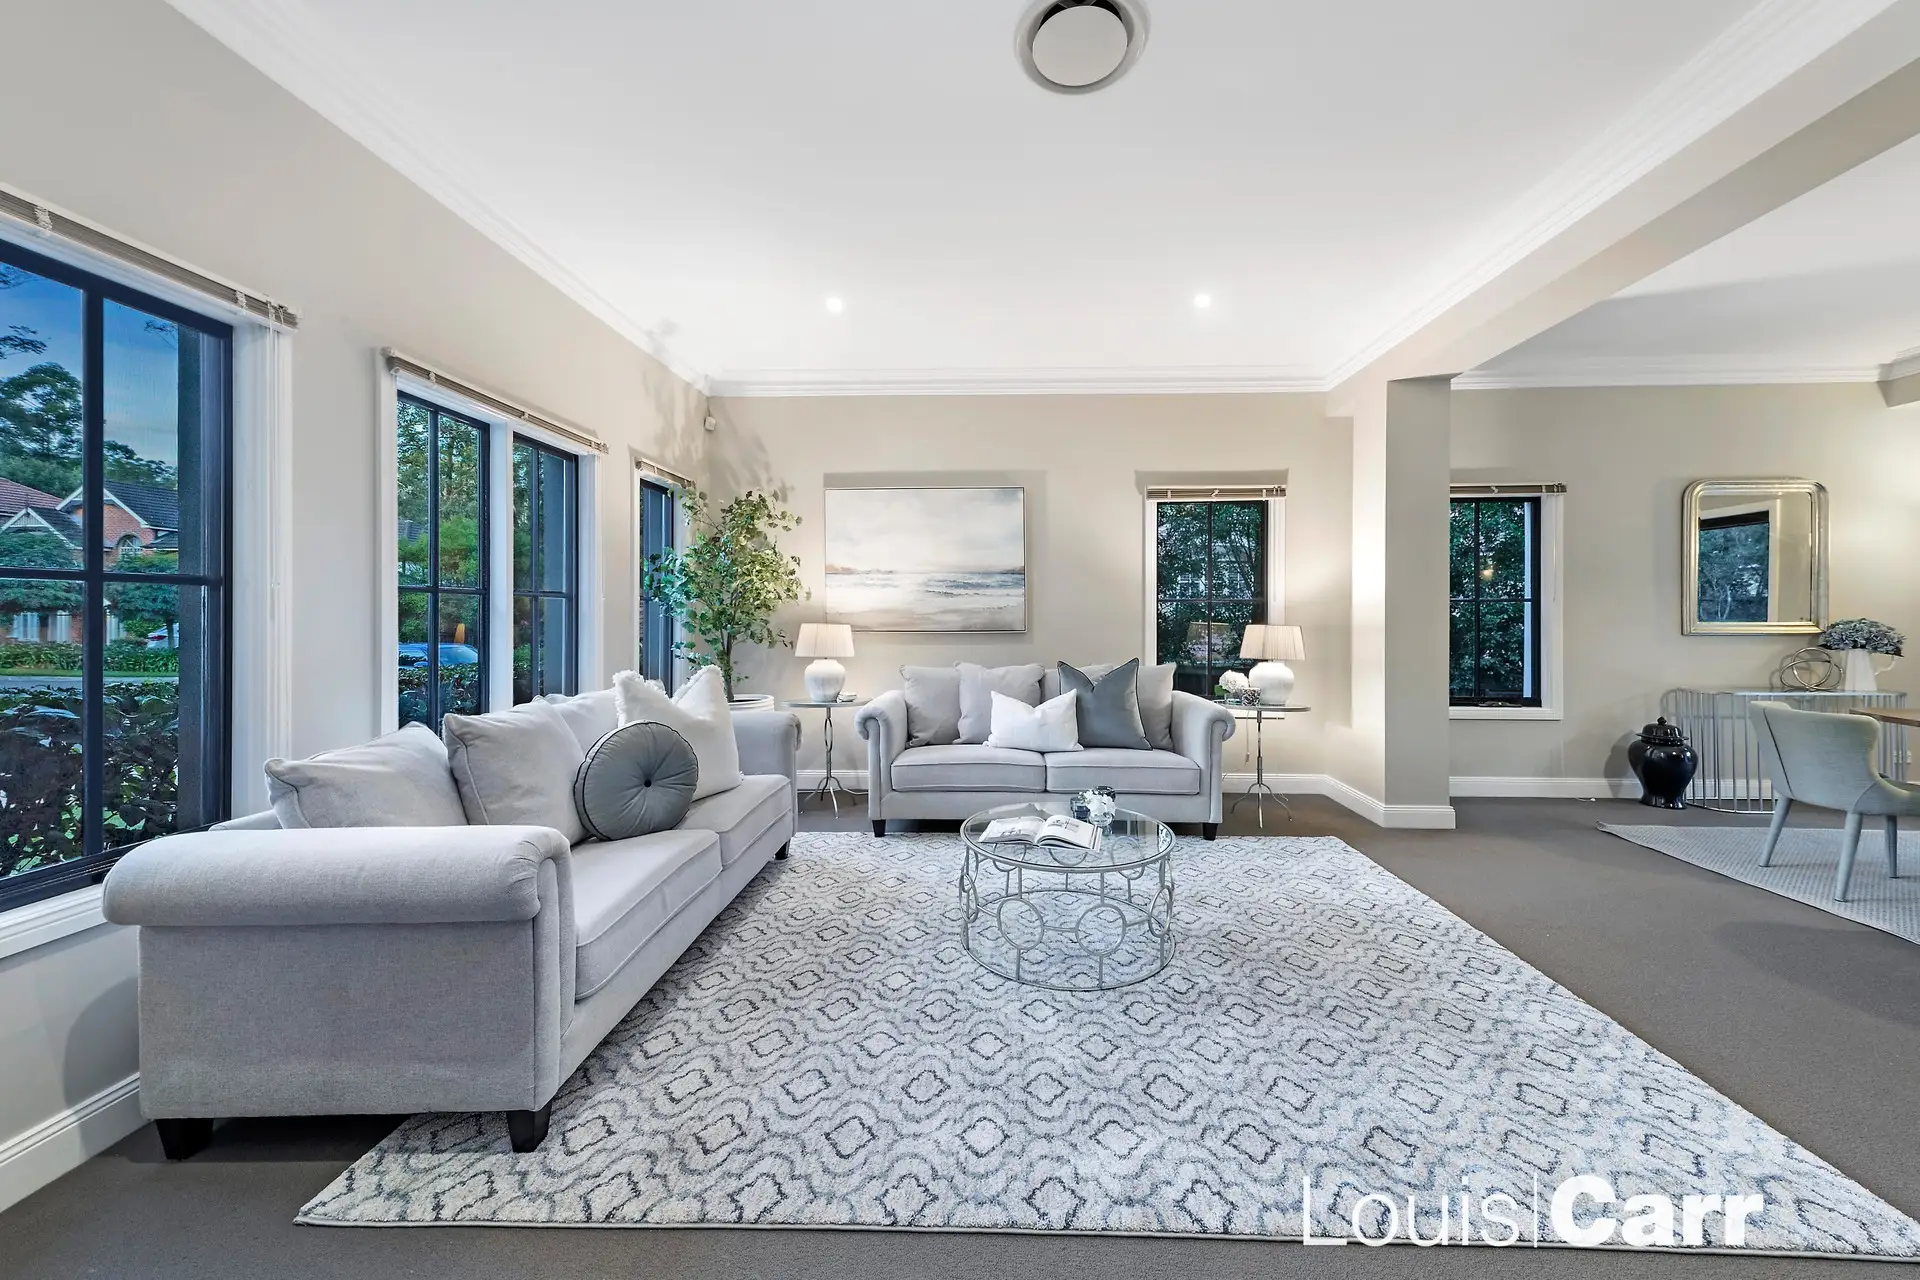 Photo #2: 17 Compton Green, West Pennant Hills - Sold by Louis Carr Real Estate